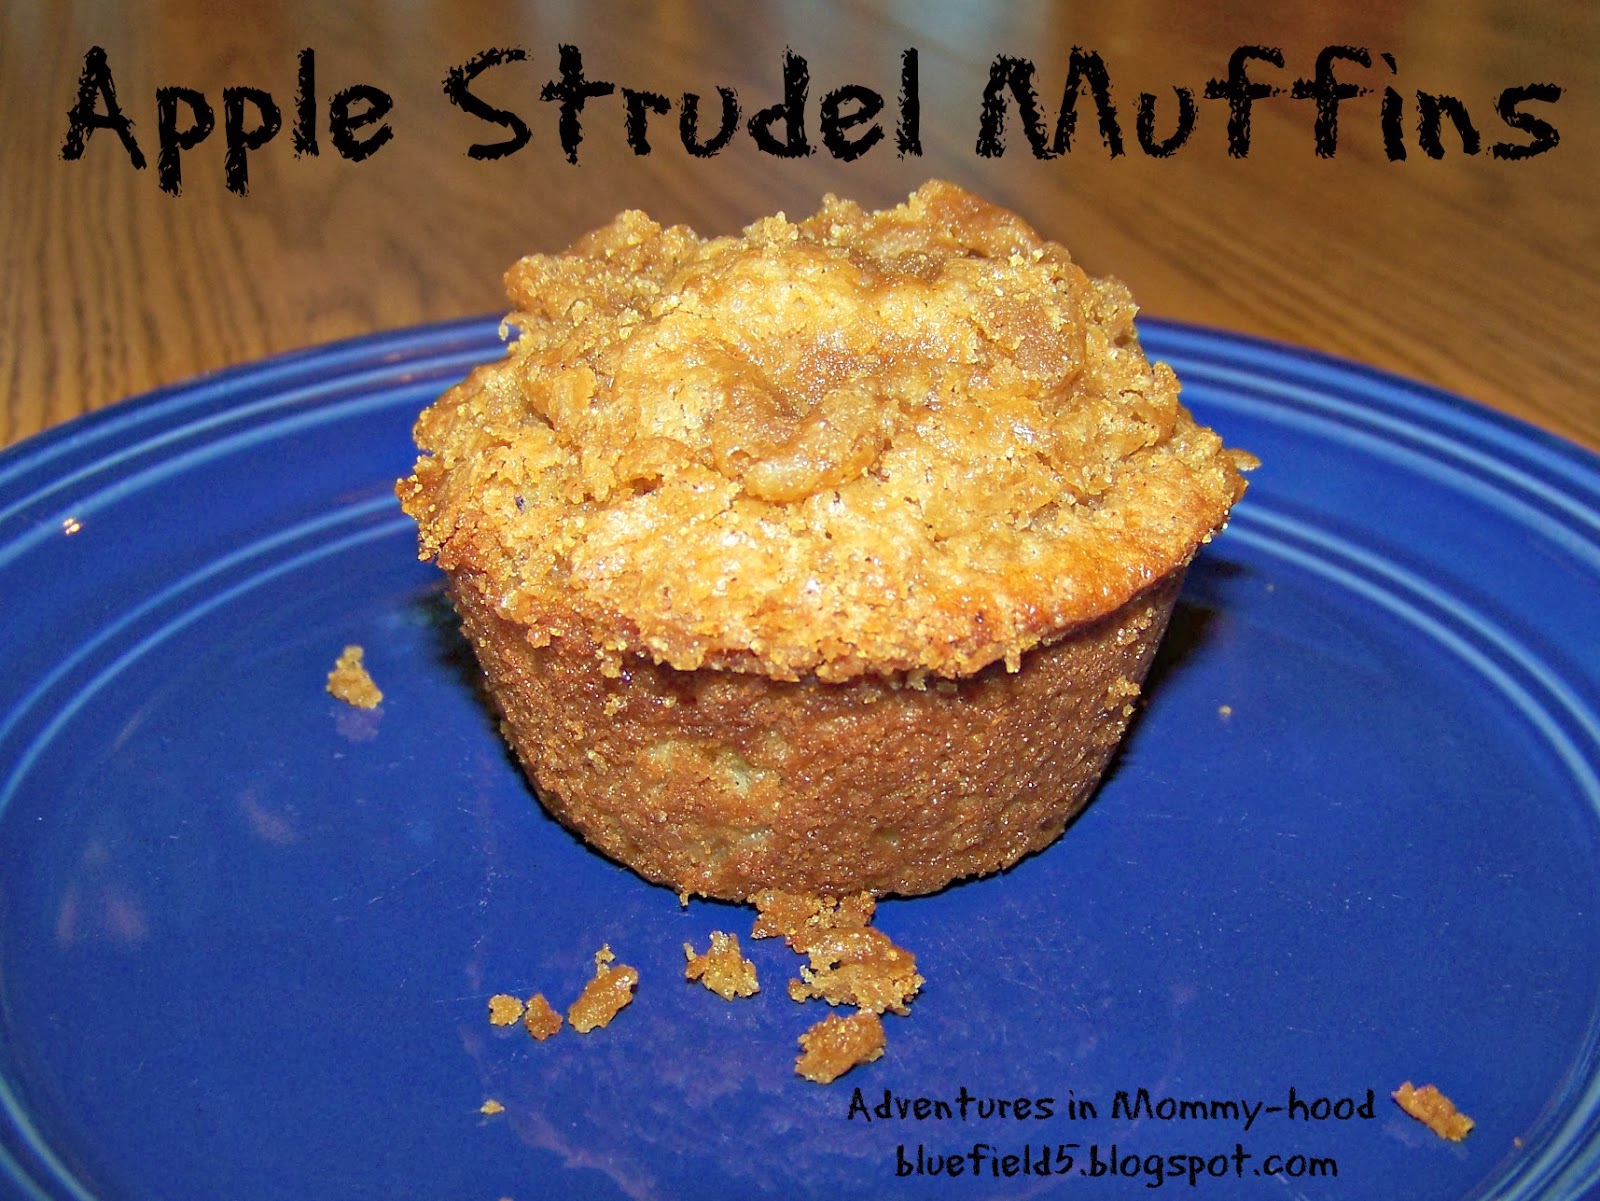 Adventures in Mommy-hood: Apple Strudel Muffins